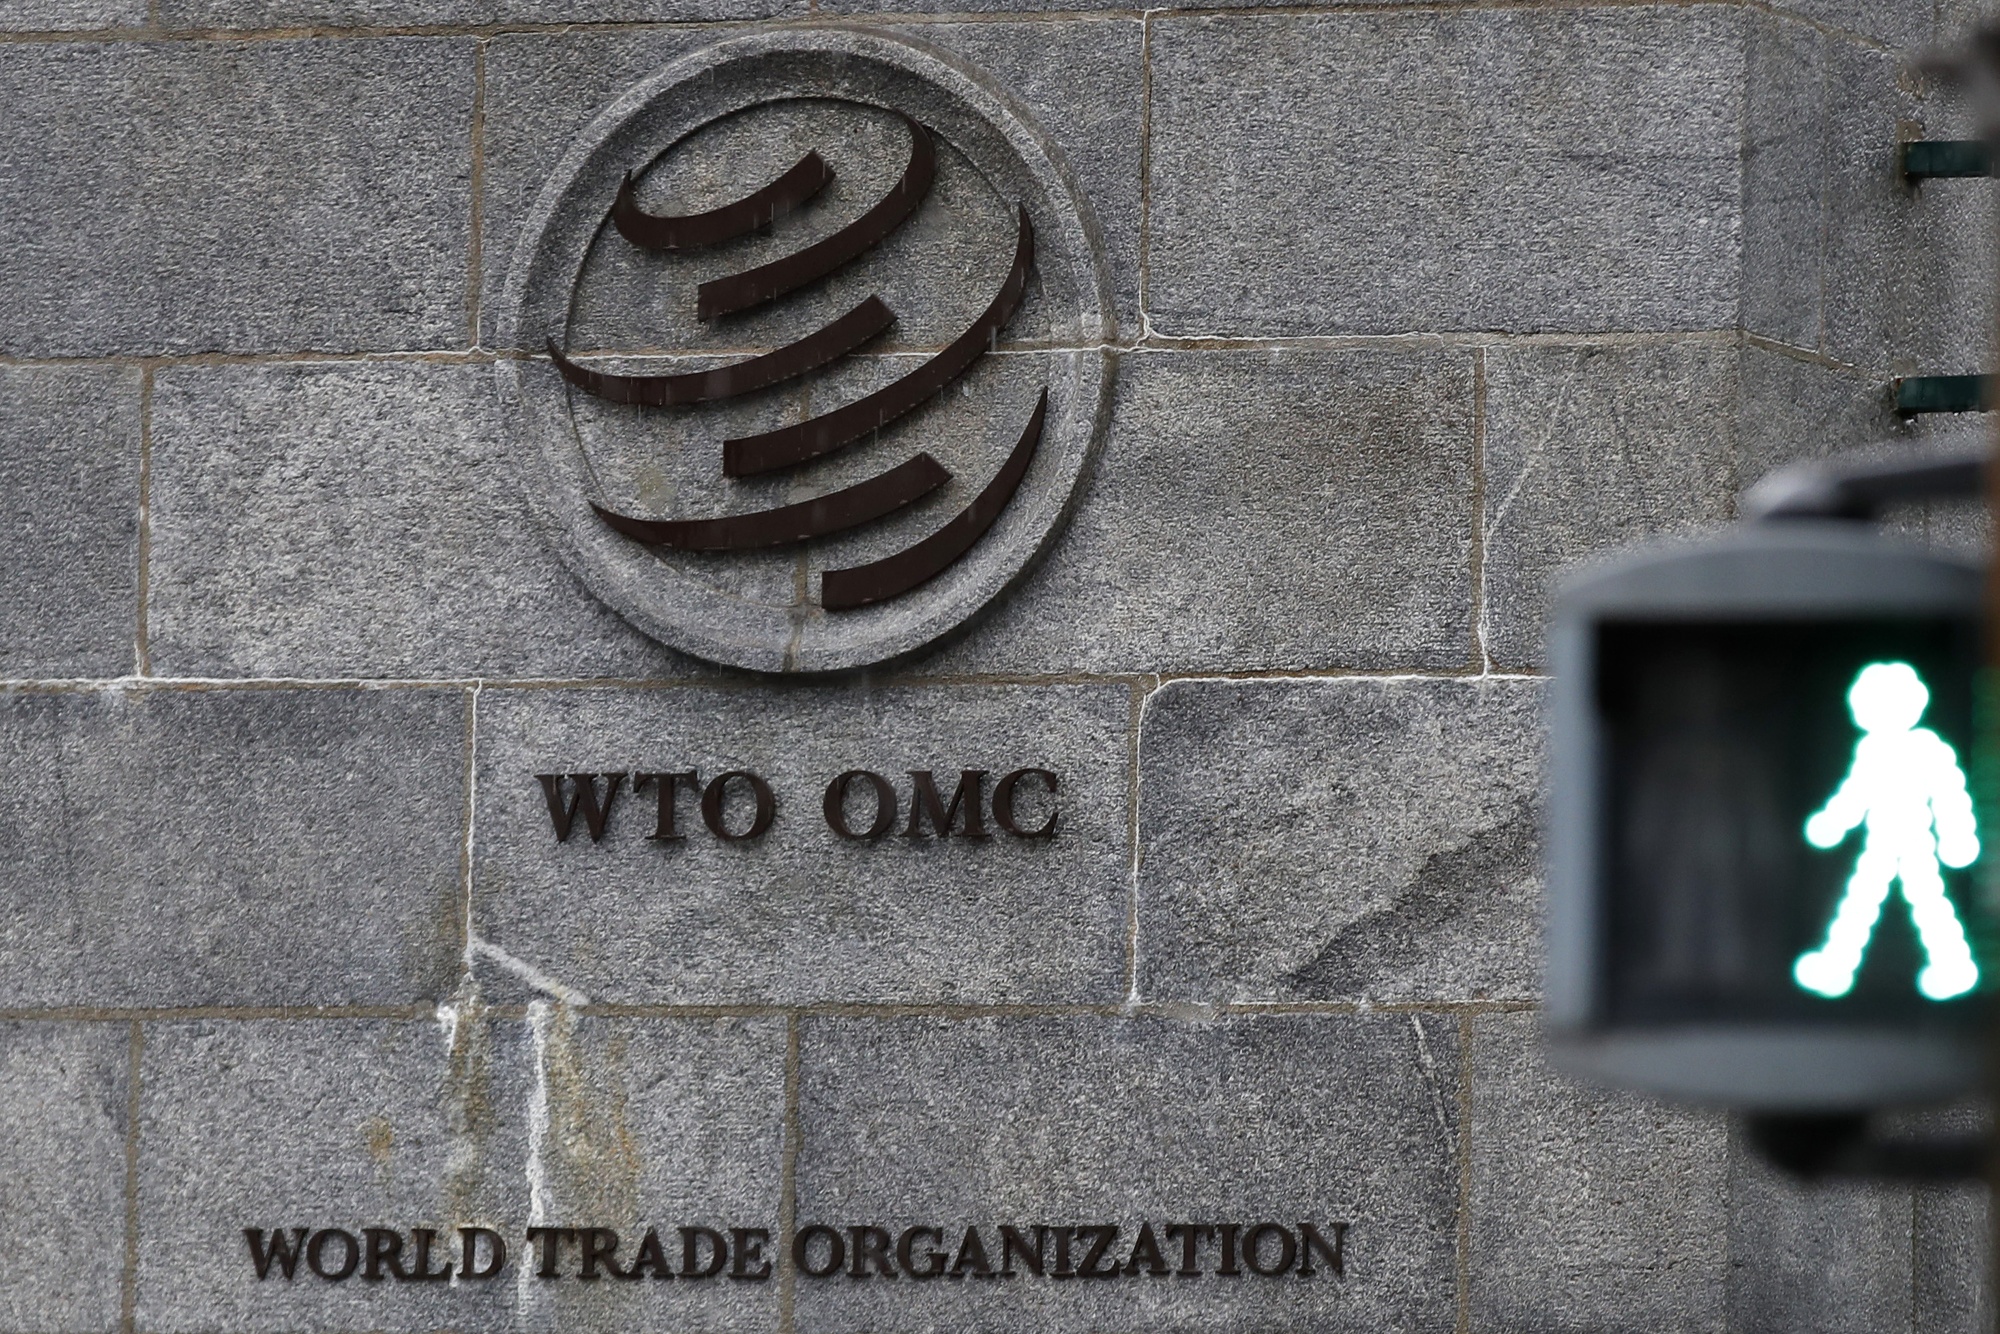 Outside the World Trade Organisation (WTO) headquarters in Geneva, Switzerland, on March 2.